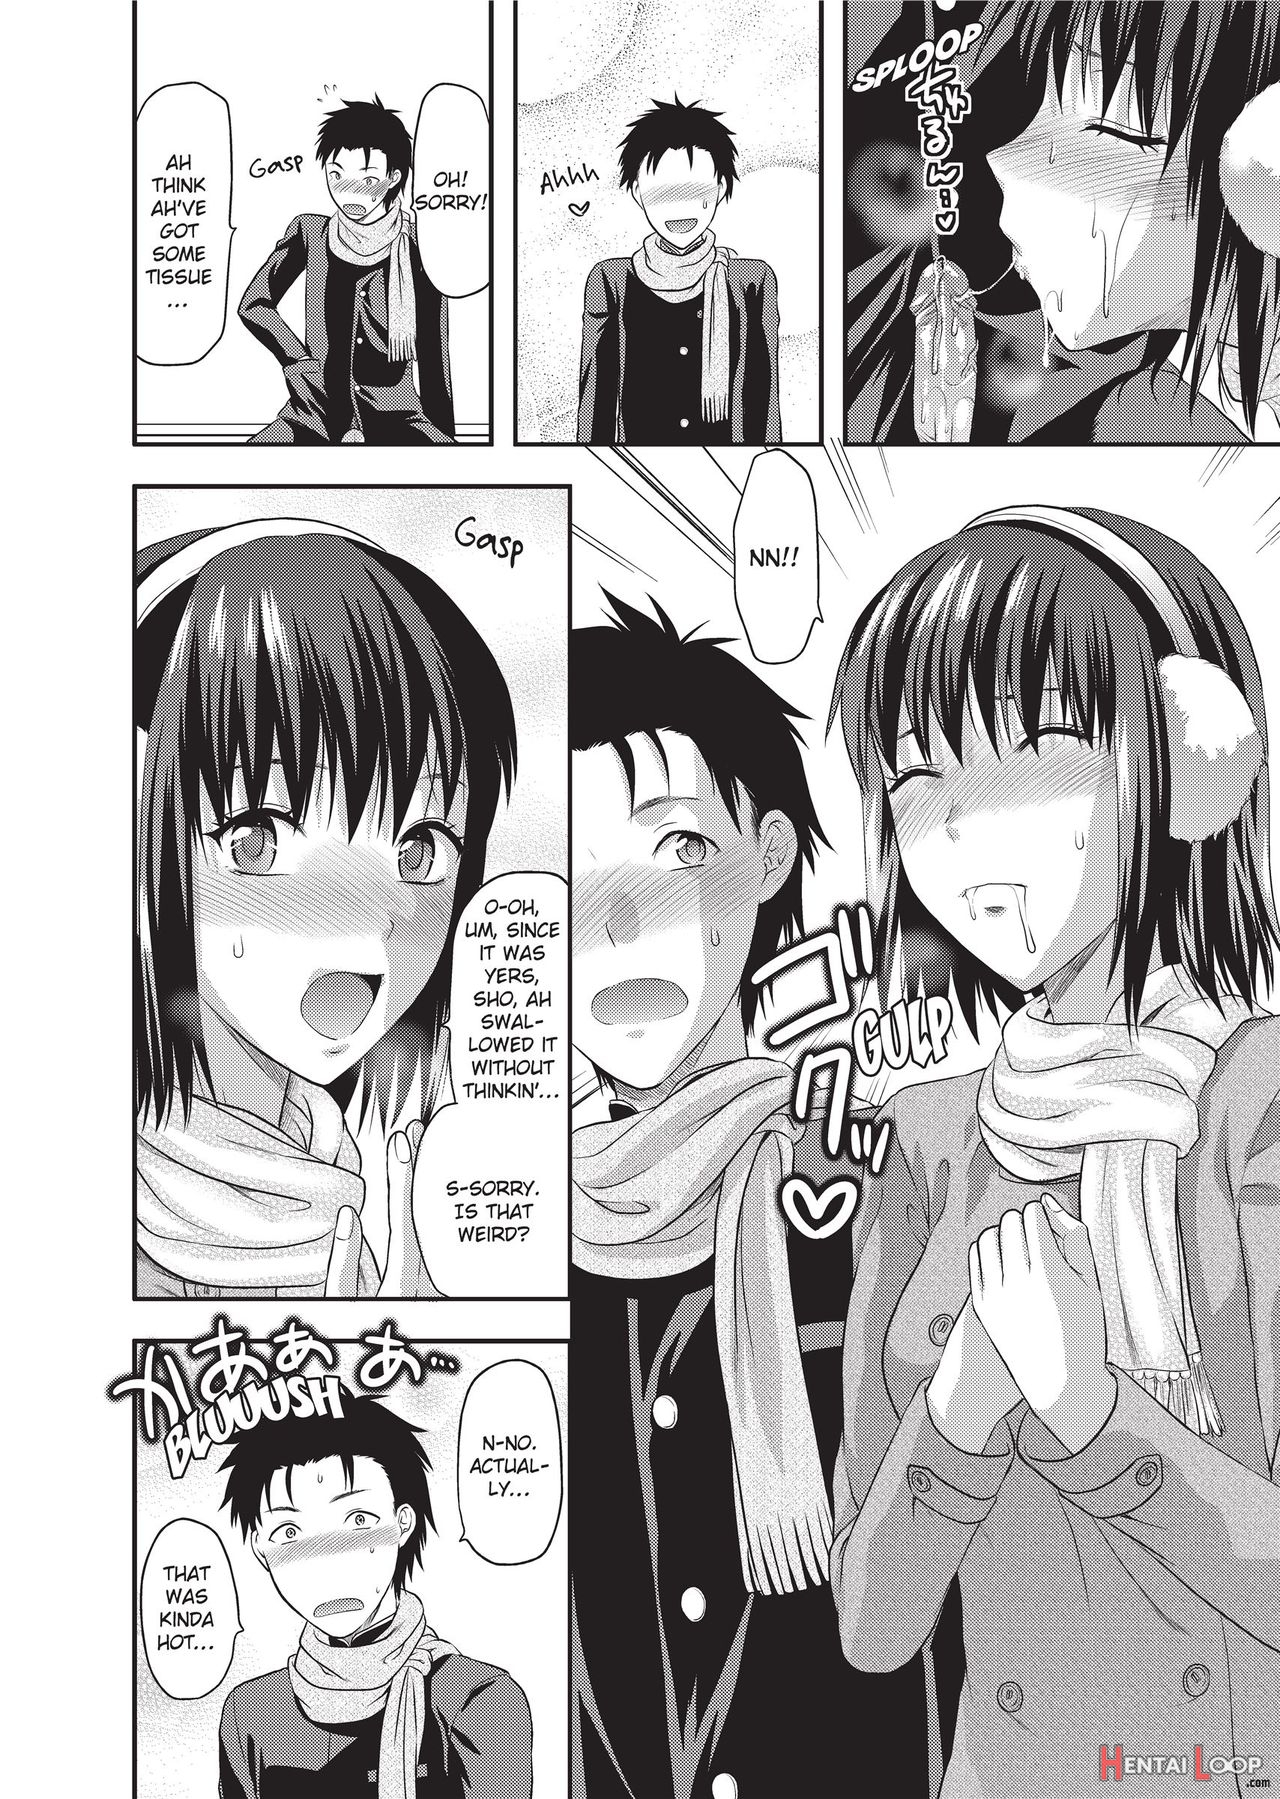 One Kore – Sweet Sister Selection page 33